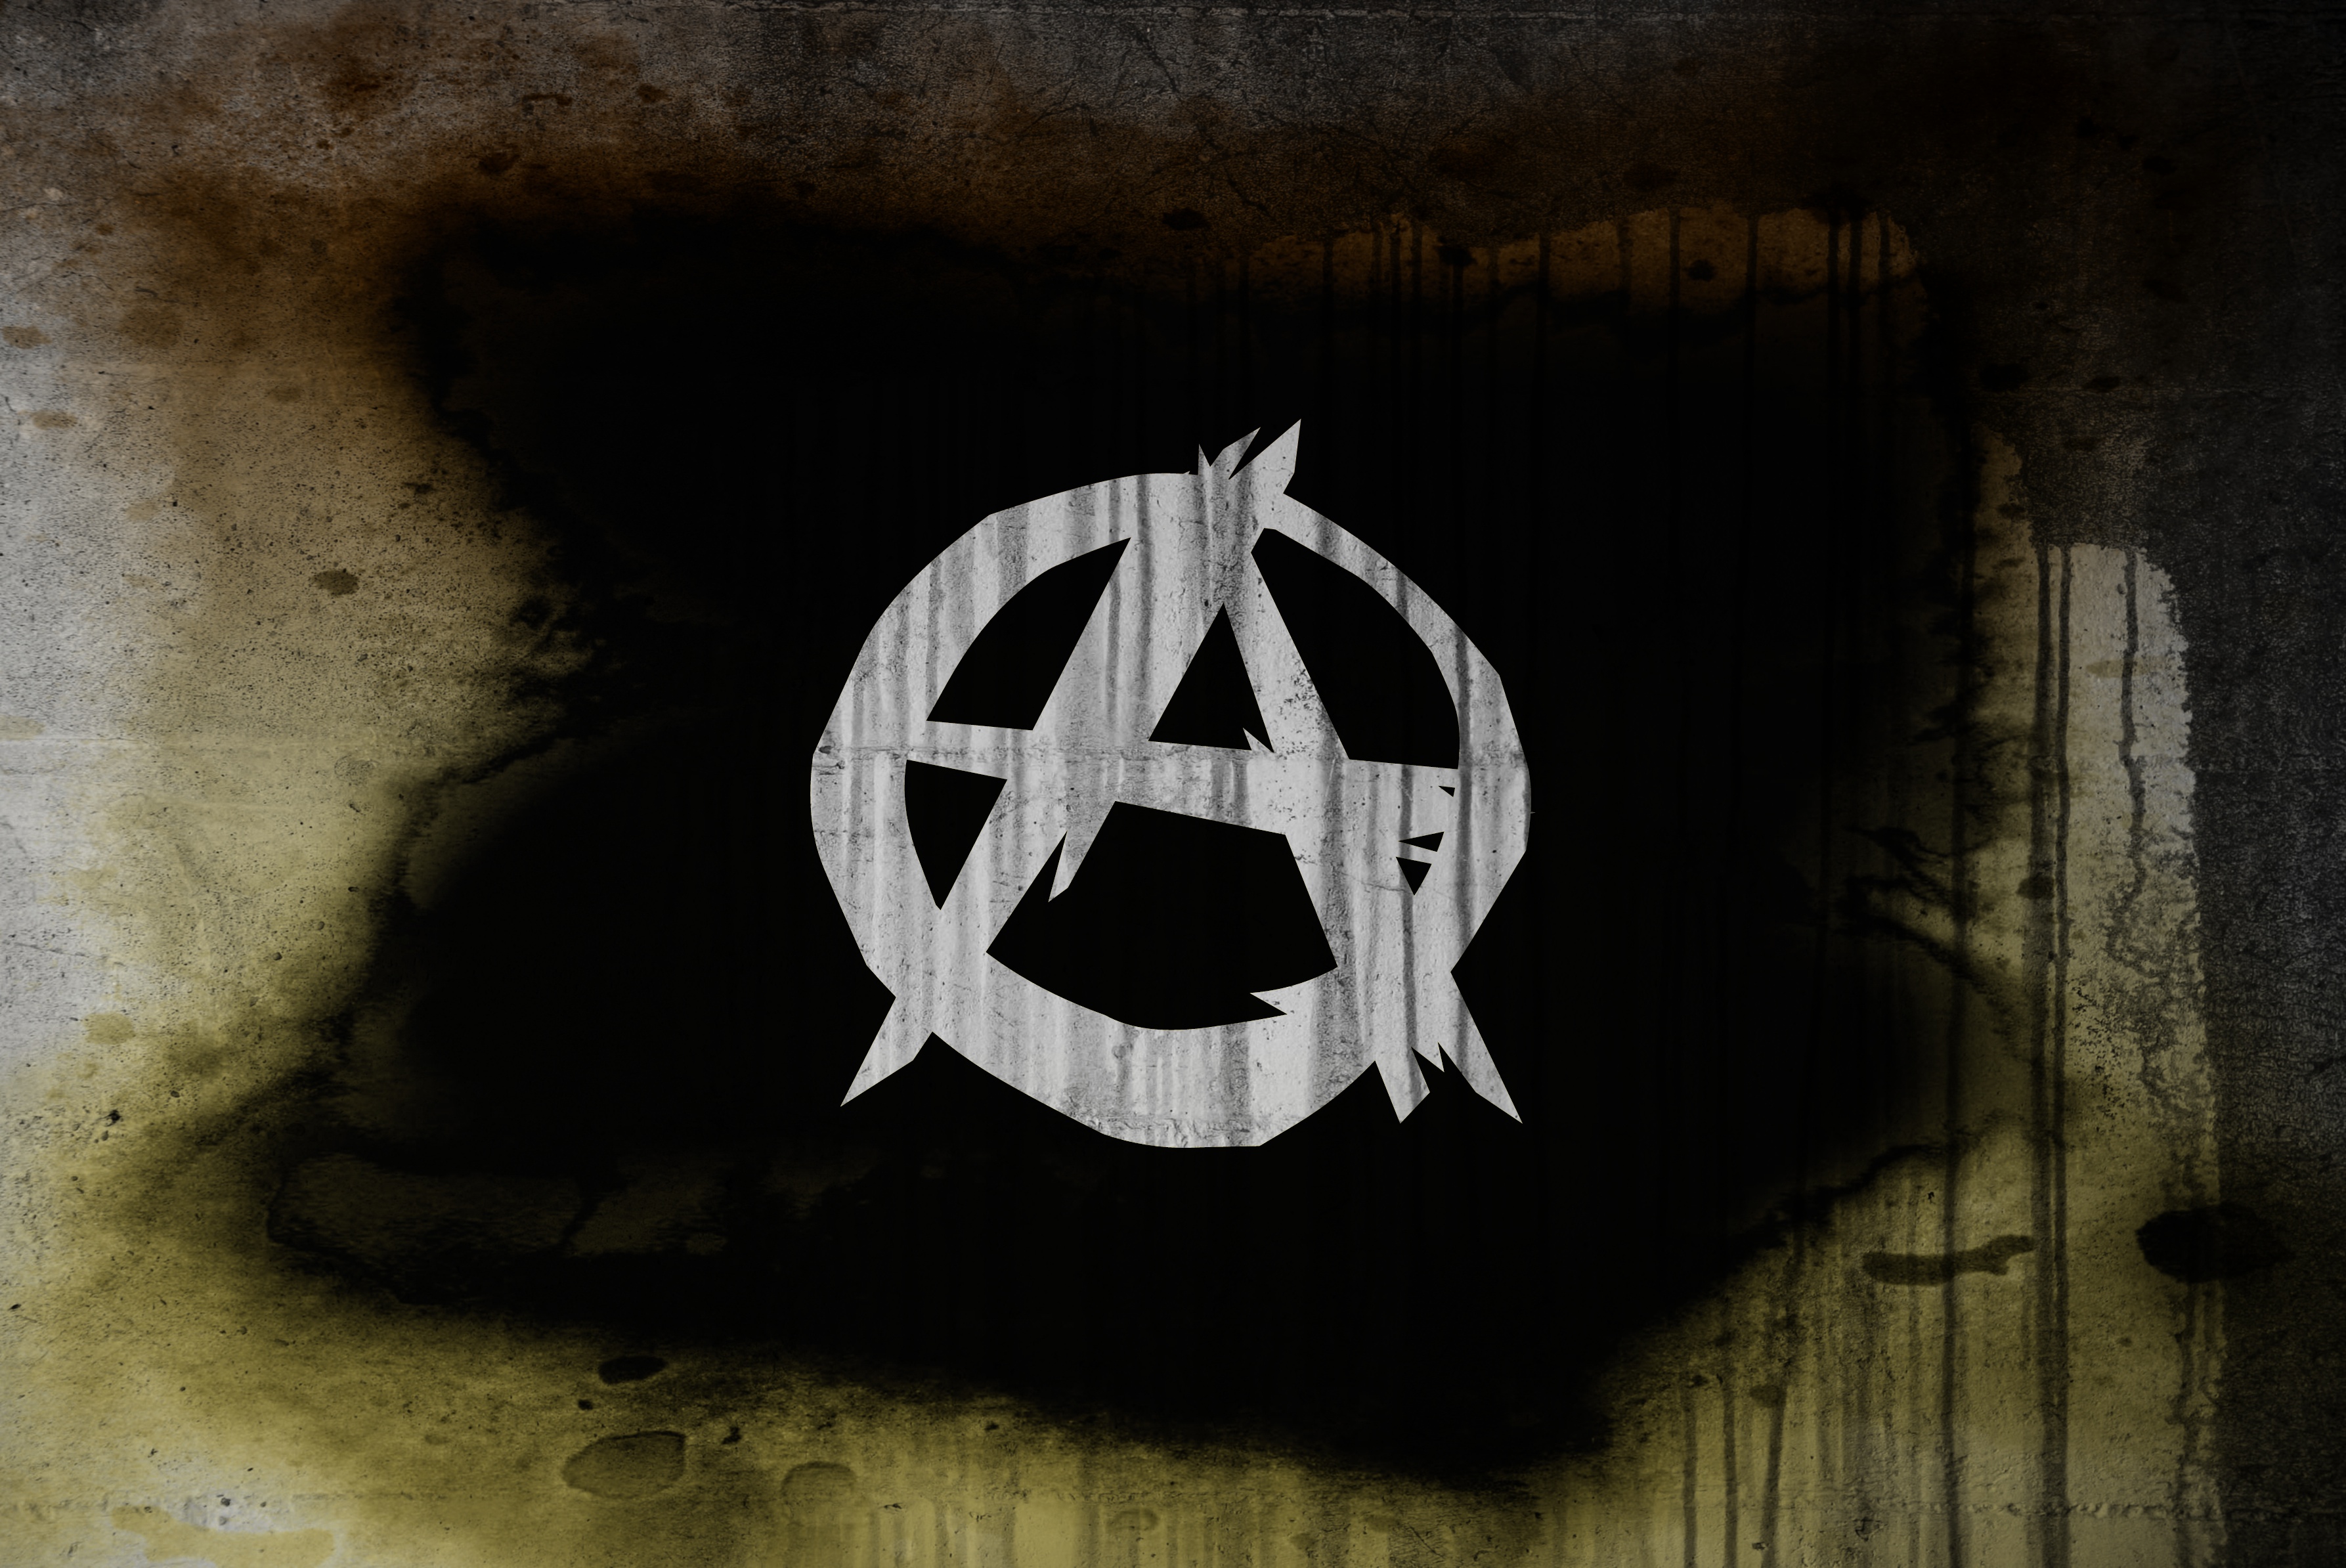 Anarchy Computer Wallpapers Desktop Backgrounds 3573x2388 ID